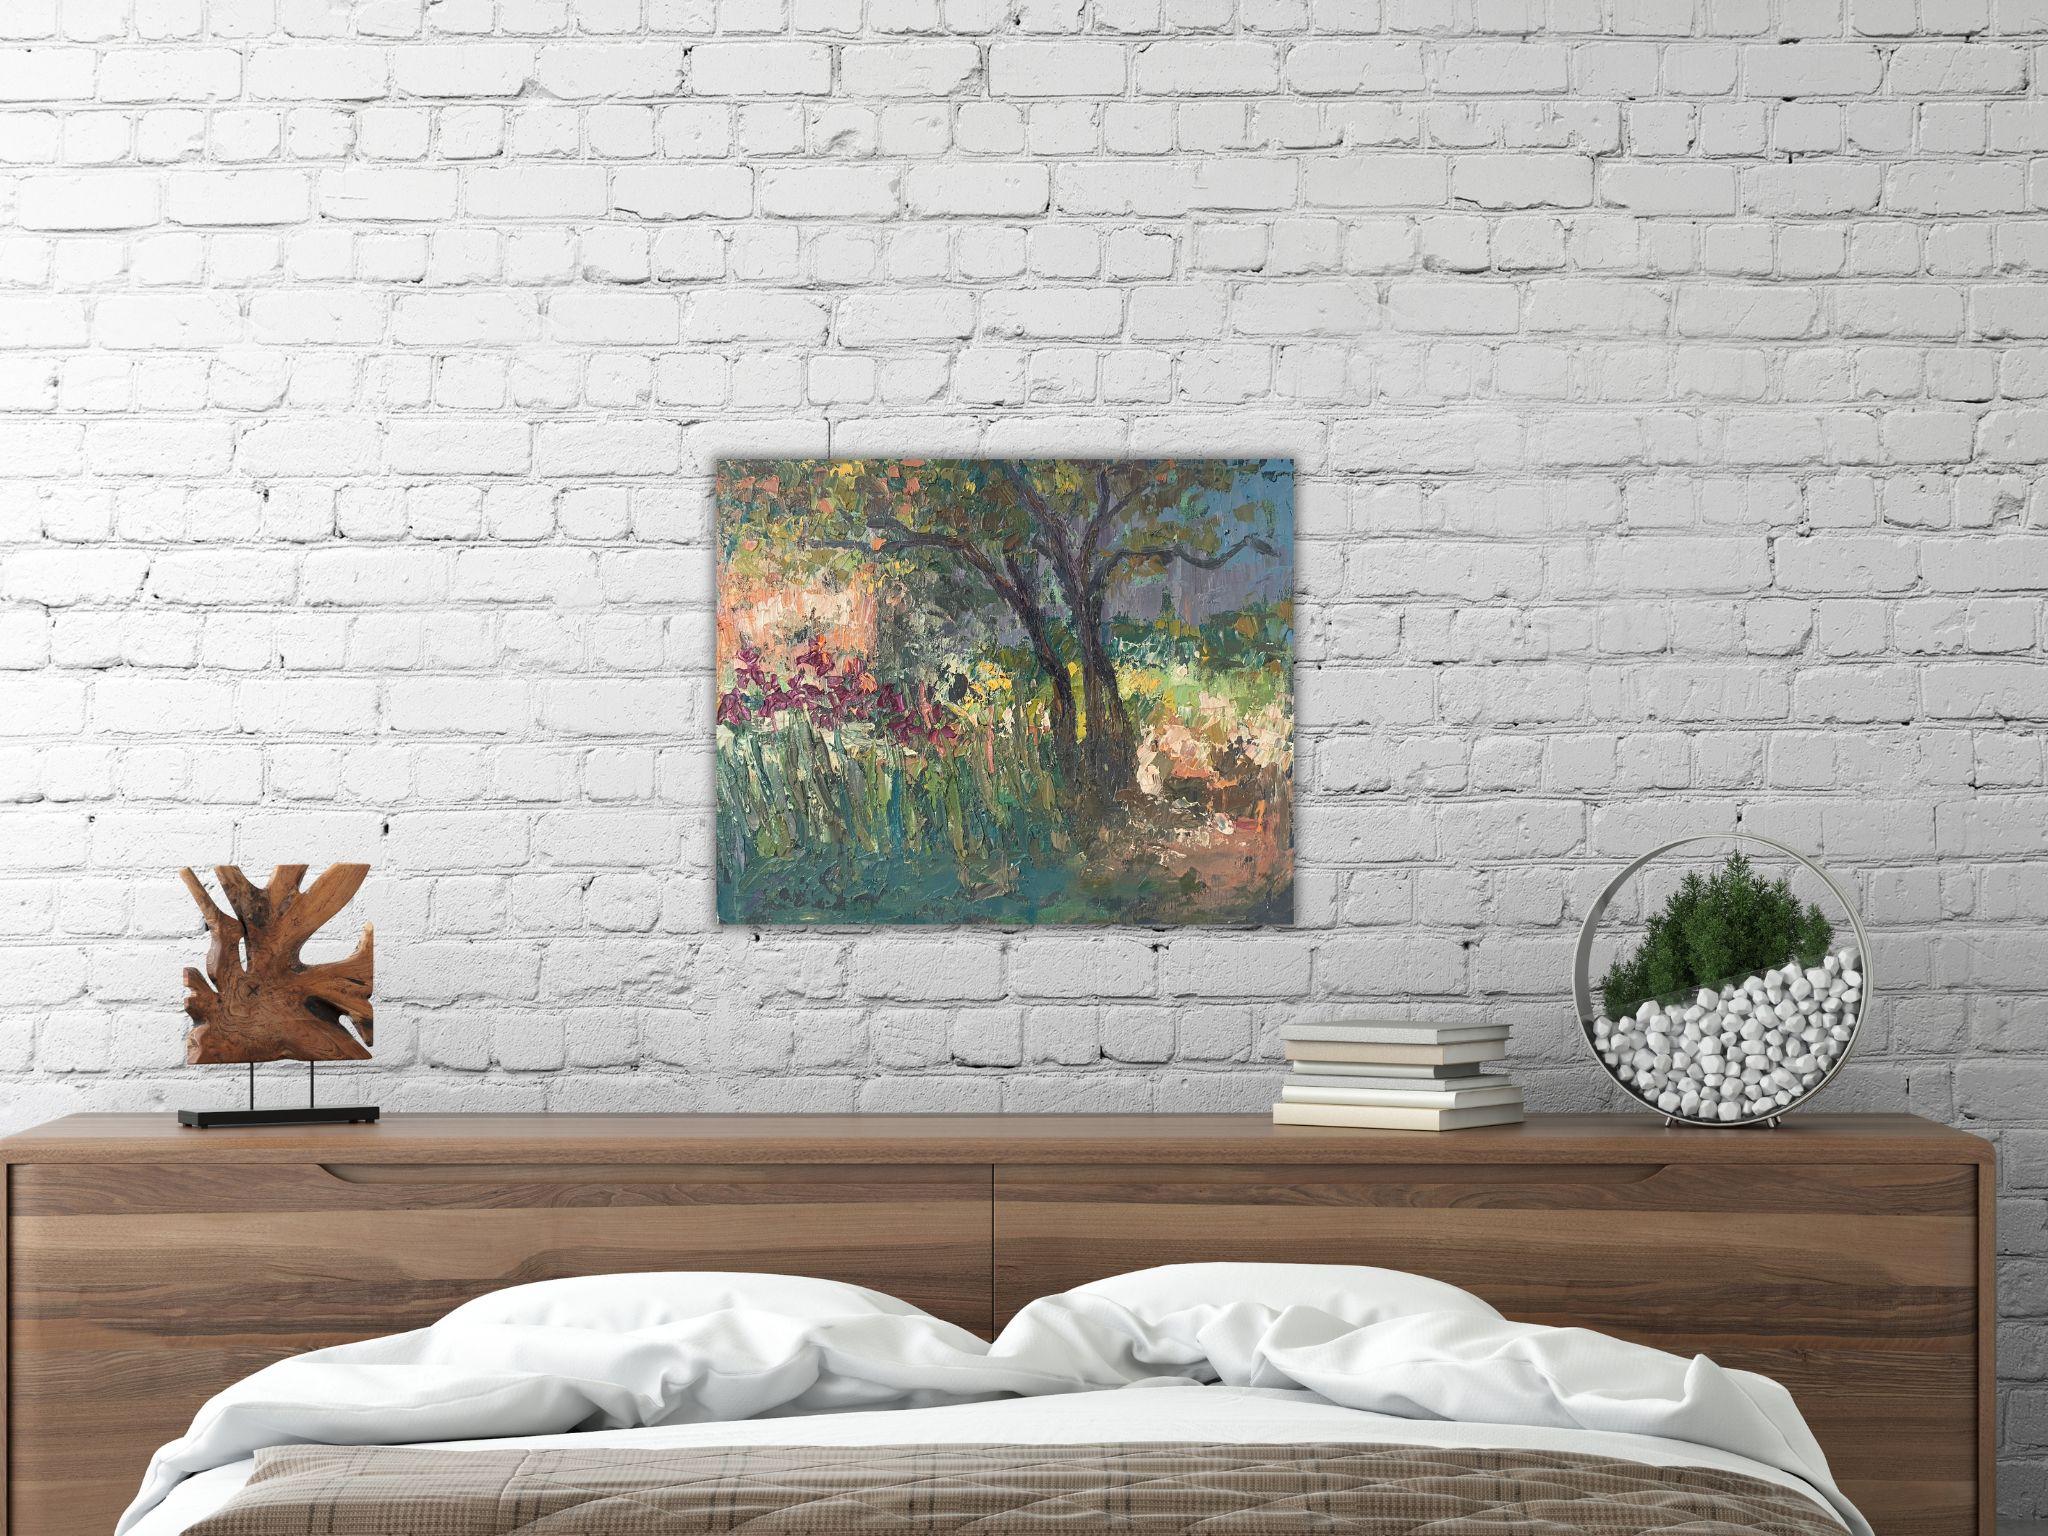 ABOUT THE ARTWORK
In this canvas, the artist has recreated a charming nook of nature where a riot of flowers and greenery unfolds beneath the branches of a majestic tree. Thick and dynamic strokes of paint infuse the scene with texture and vivacity,